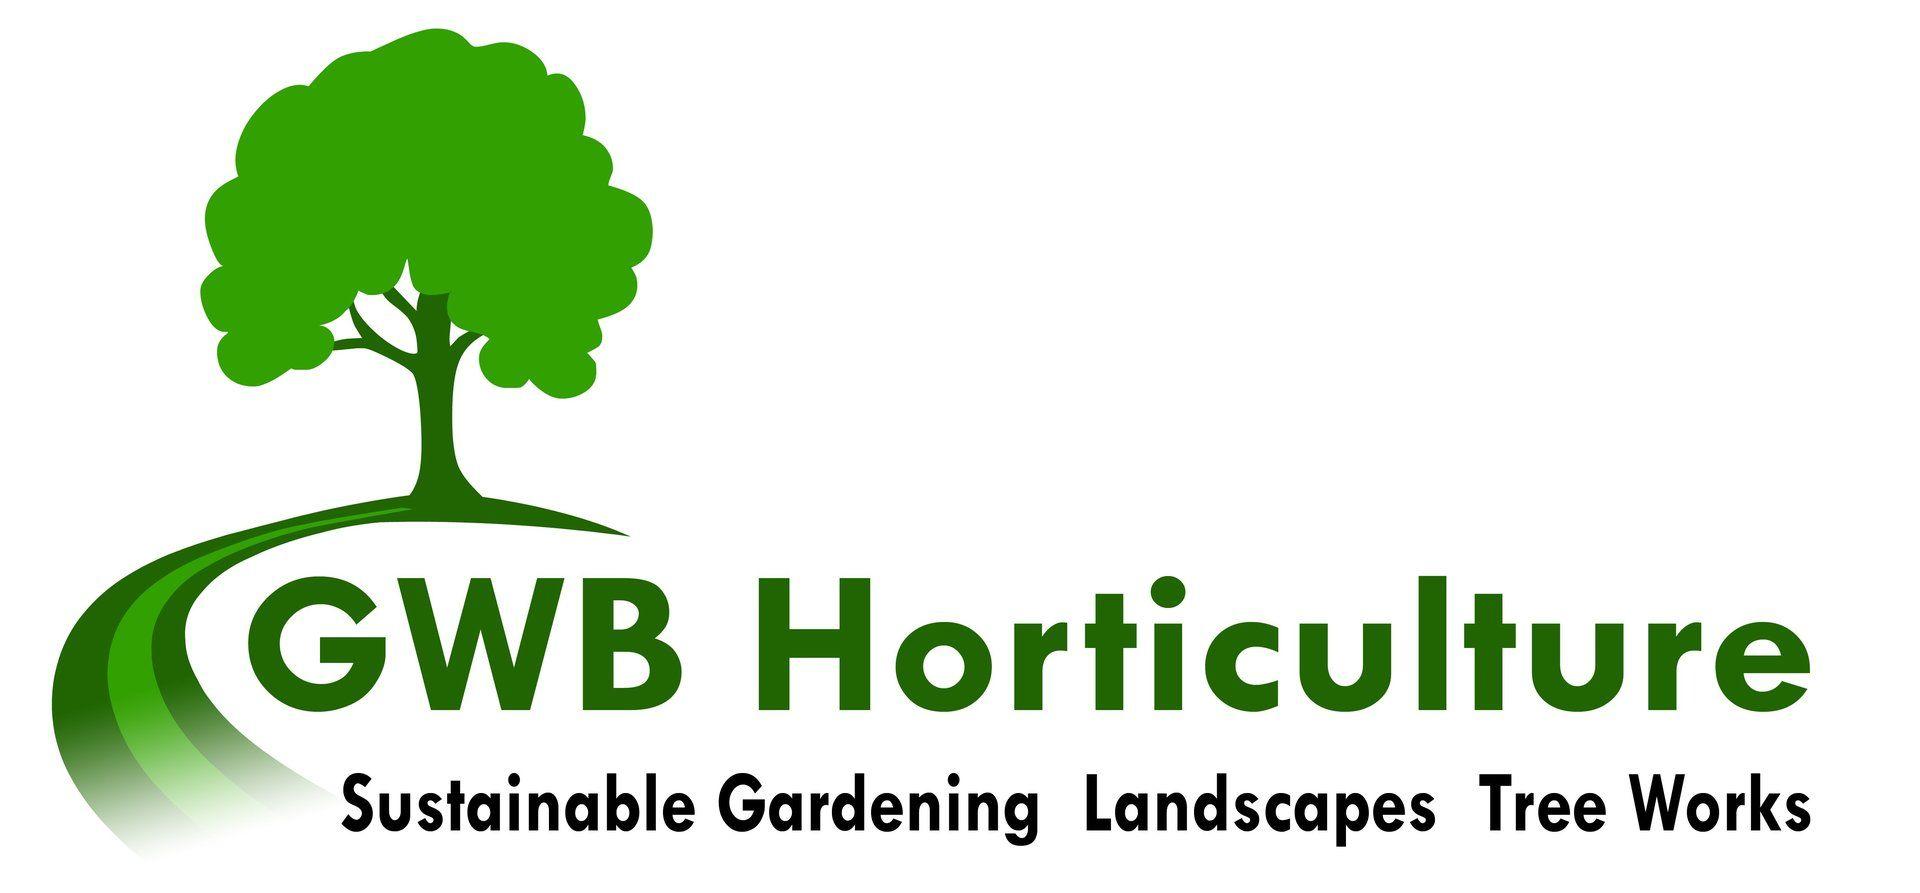 Horticulture Logo - Horticulture specialists in Essex from GWB Horticulture Ltd